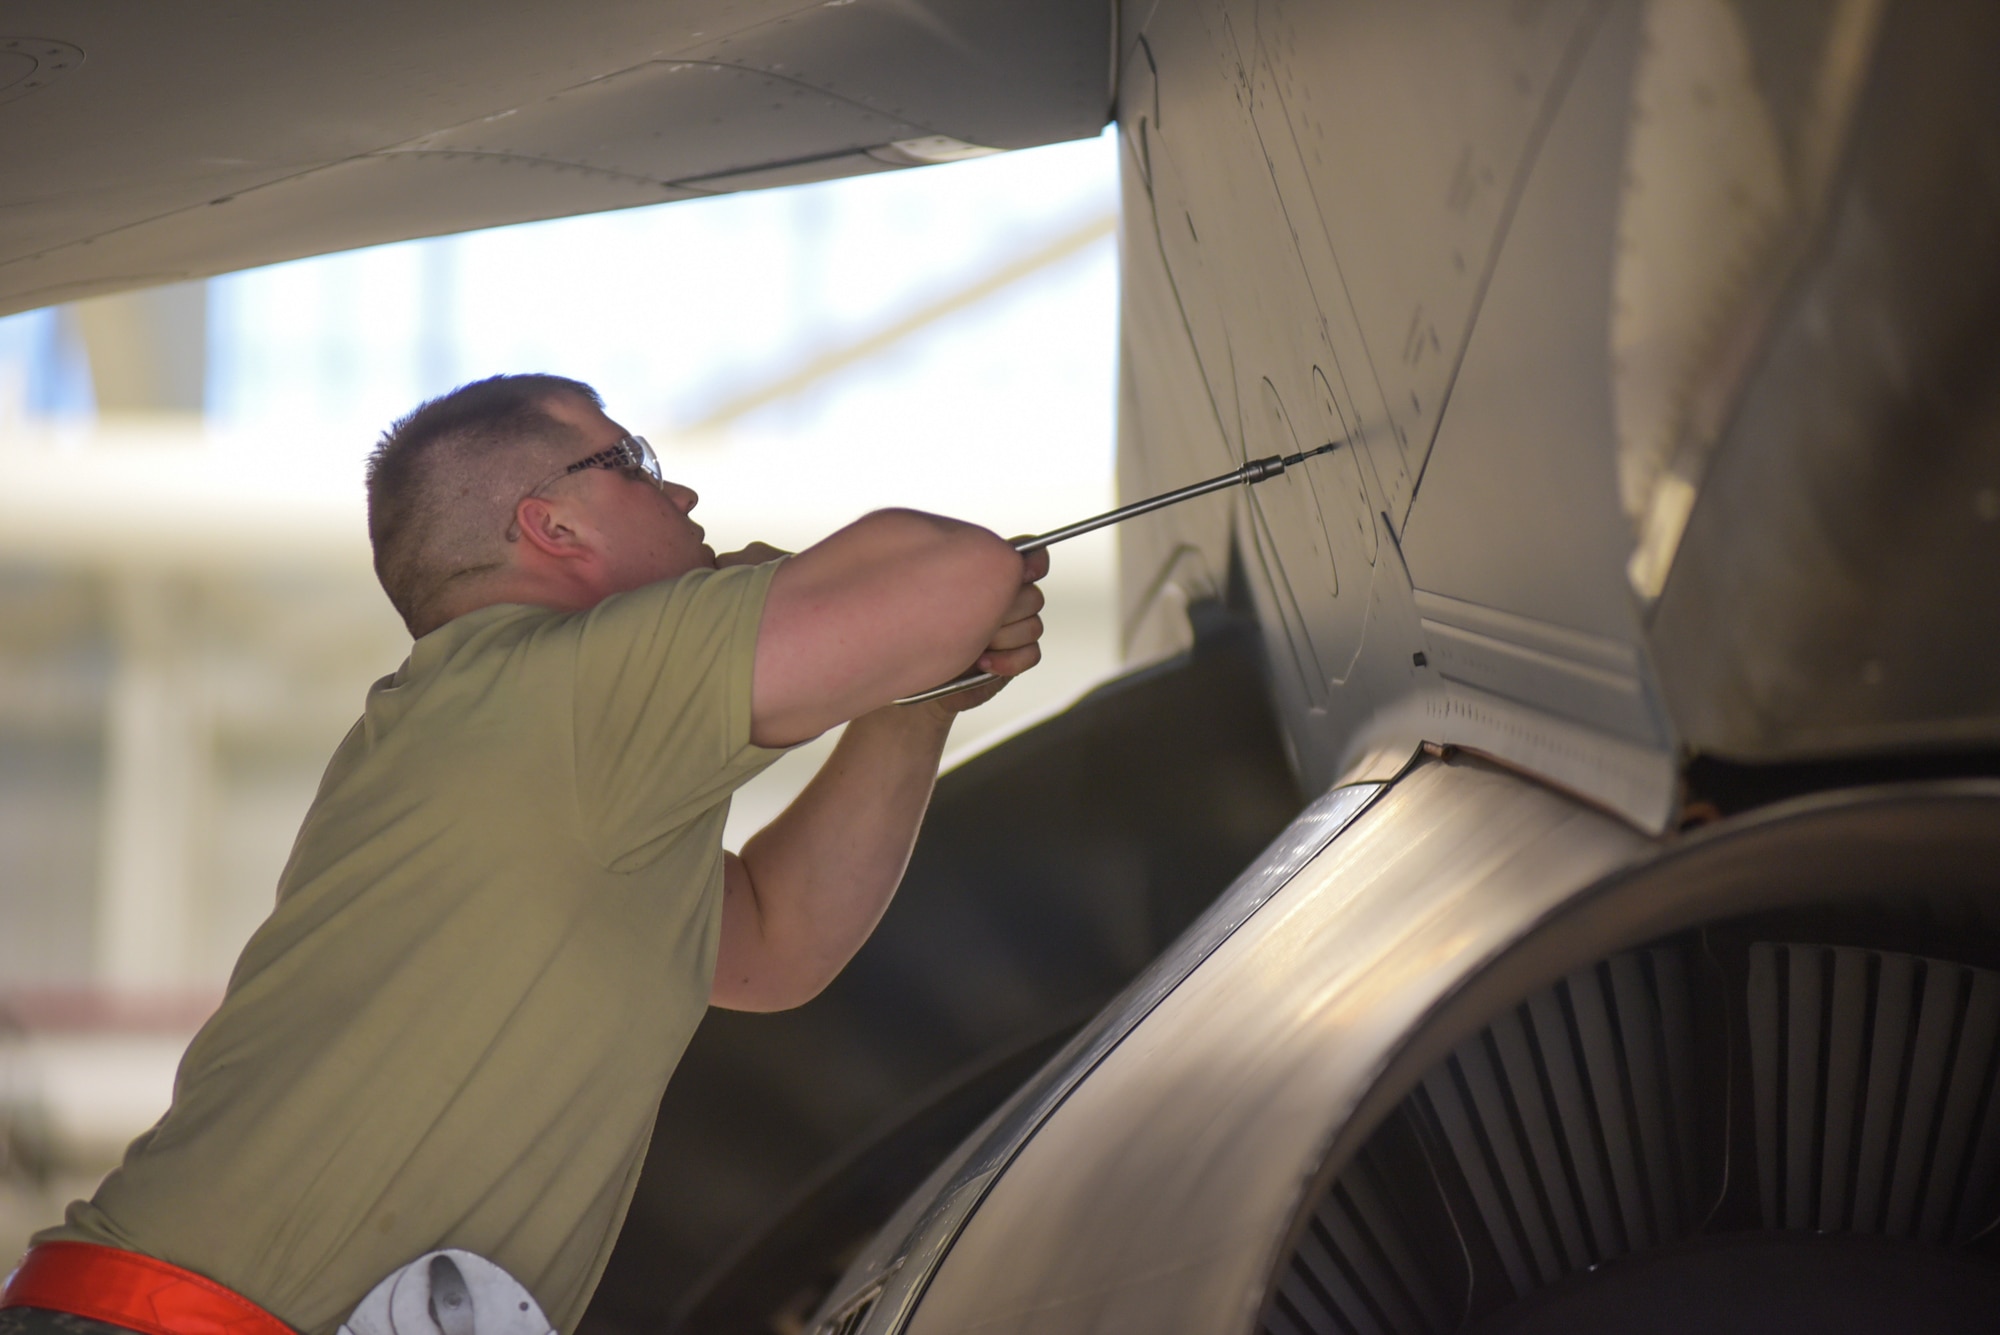 Staff Sgt. Christian Eads, 22nd Maintenance Squadron aerospace propulsion specialist, removes a panel above a KC-46 Pegasus engine March 20, 2019 at McConnell Air Force Base, Kan. The A-check team is responsible for conducting multiple operational tests to include lubricating landing gear, flight controls and engine components. (U.S. Air Force photo by Staff Sgt. Chris Thornbury)